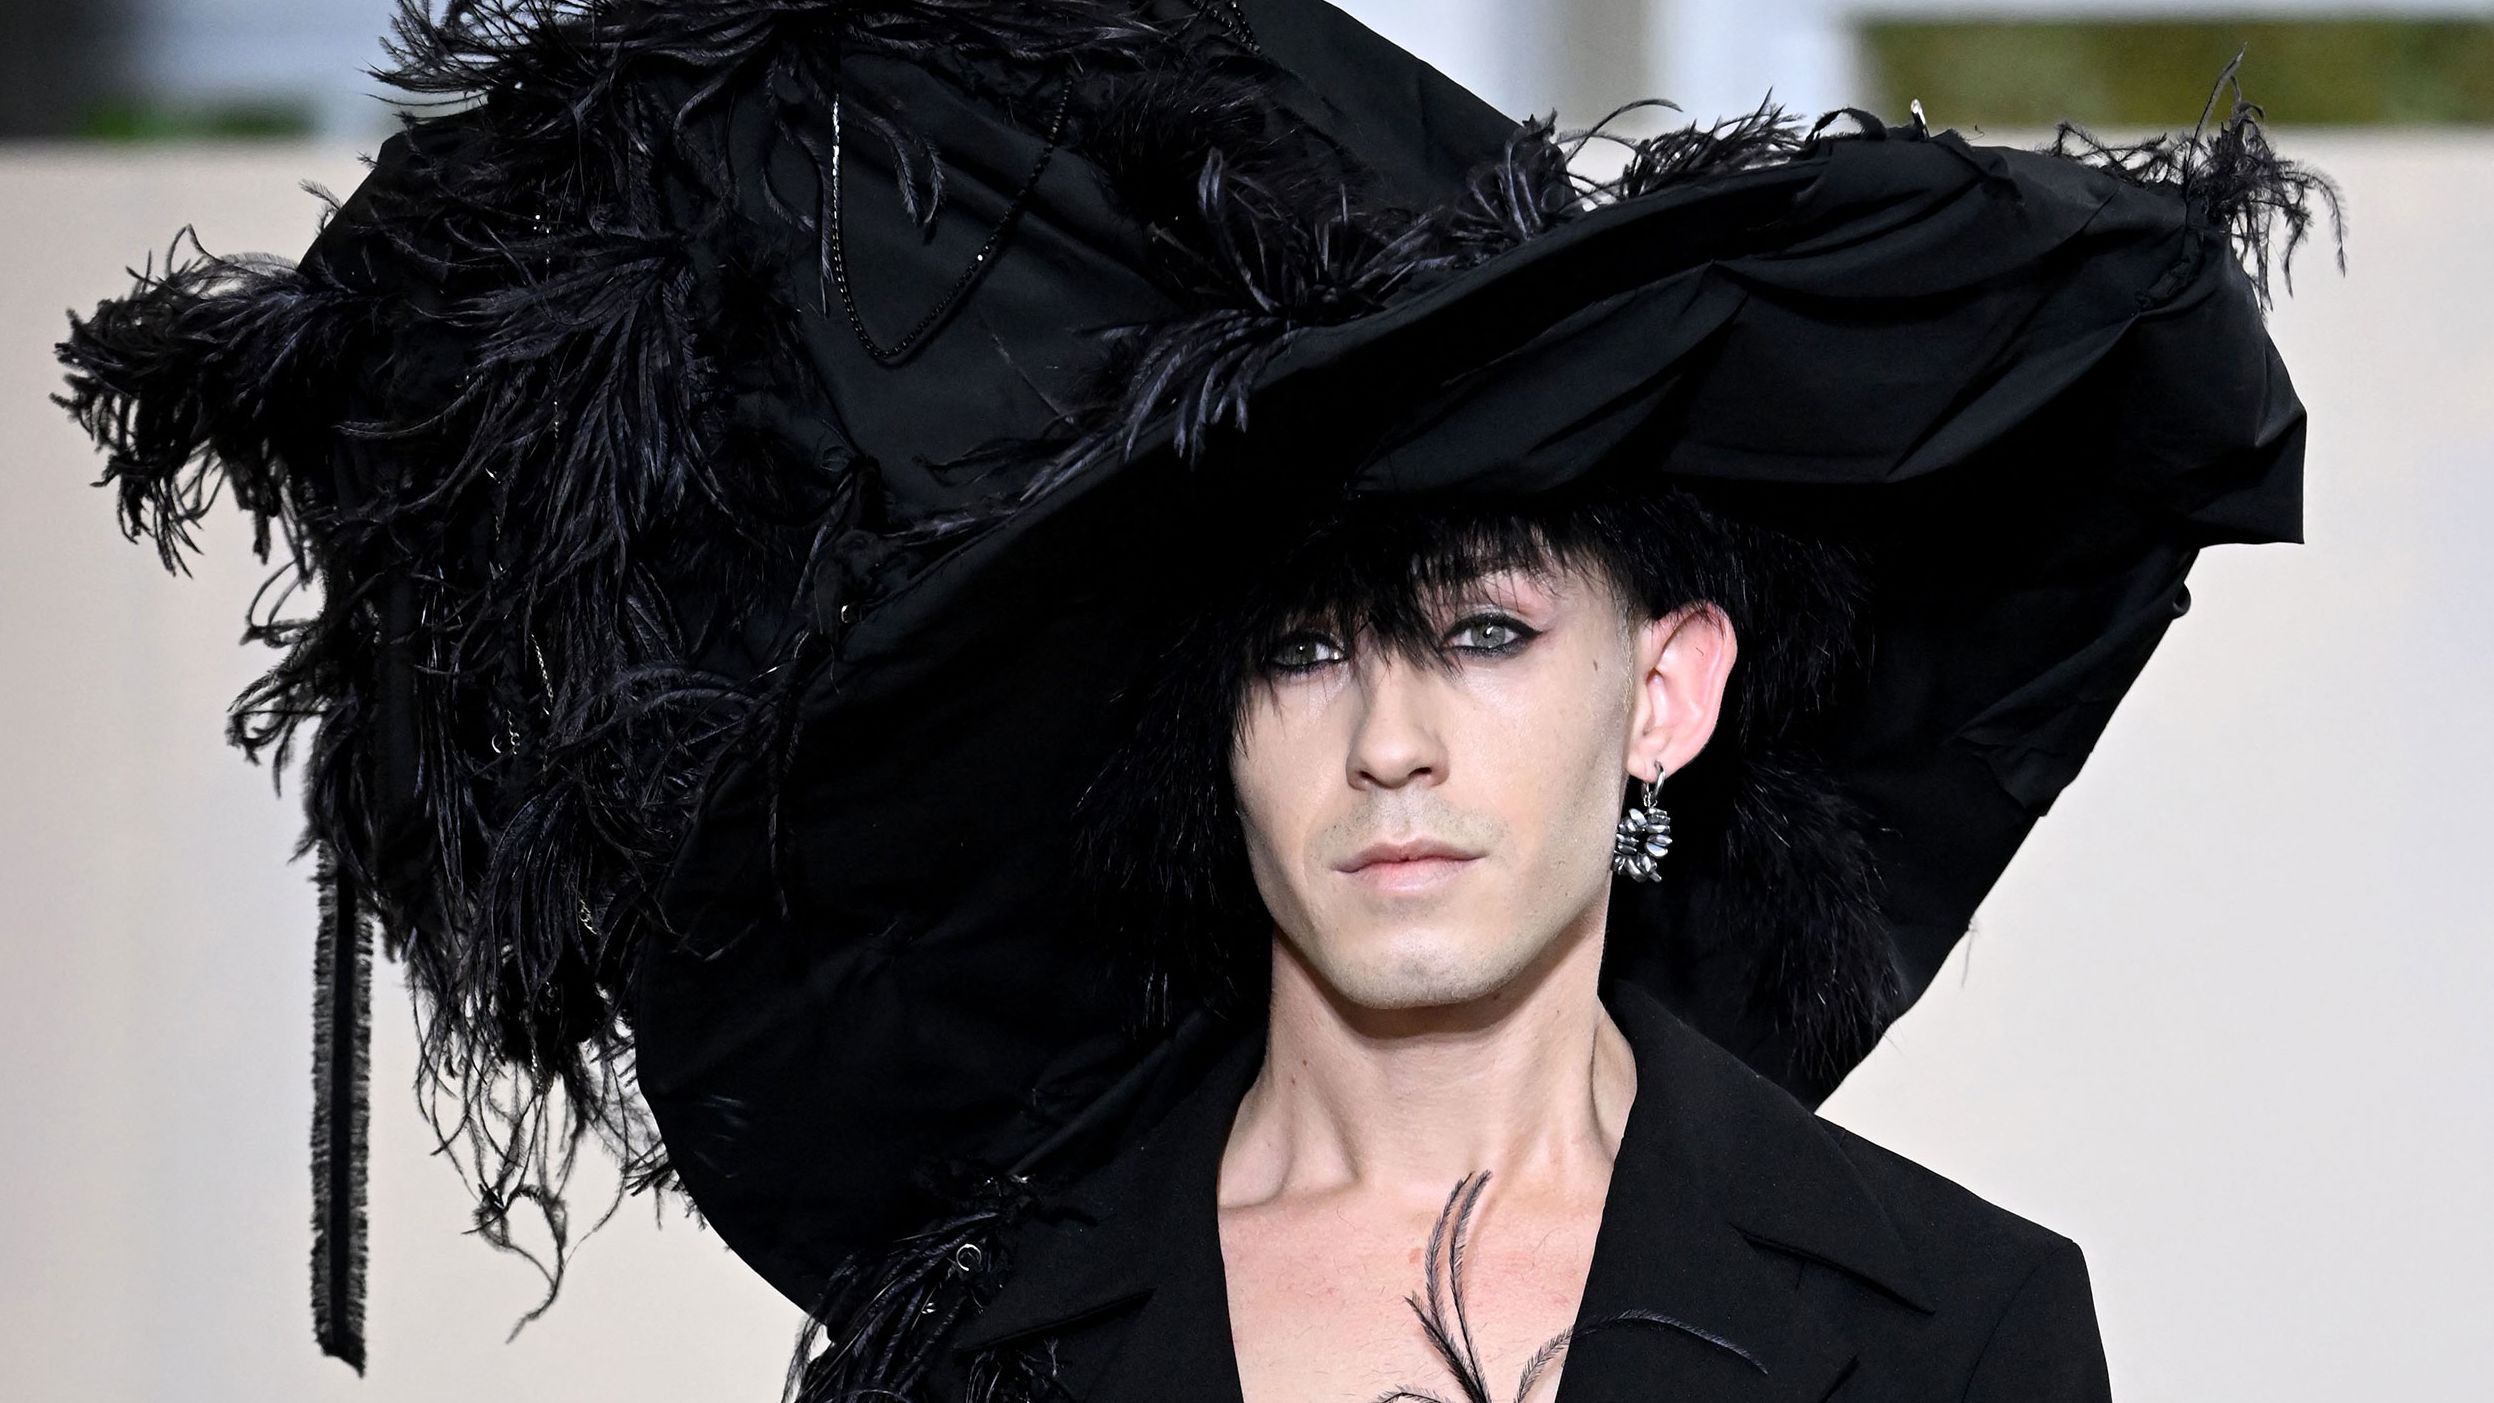 A model presents a creation for Weinsanto during a fashion show in Paris on Monday, September 26.